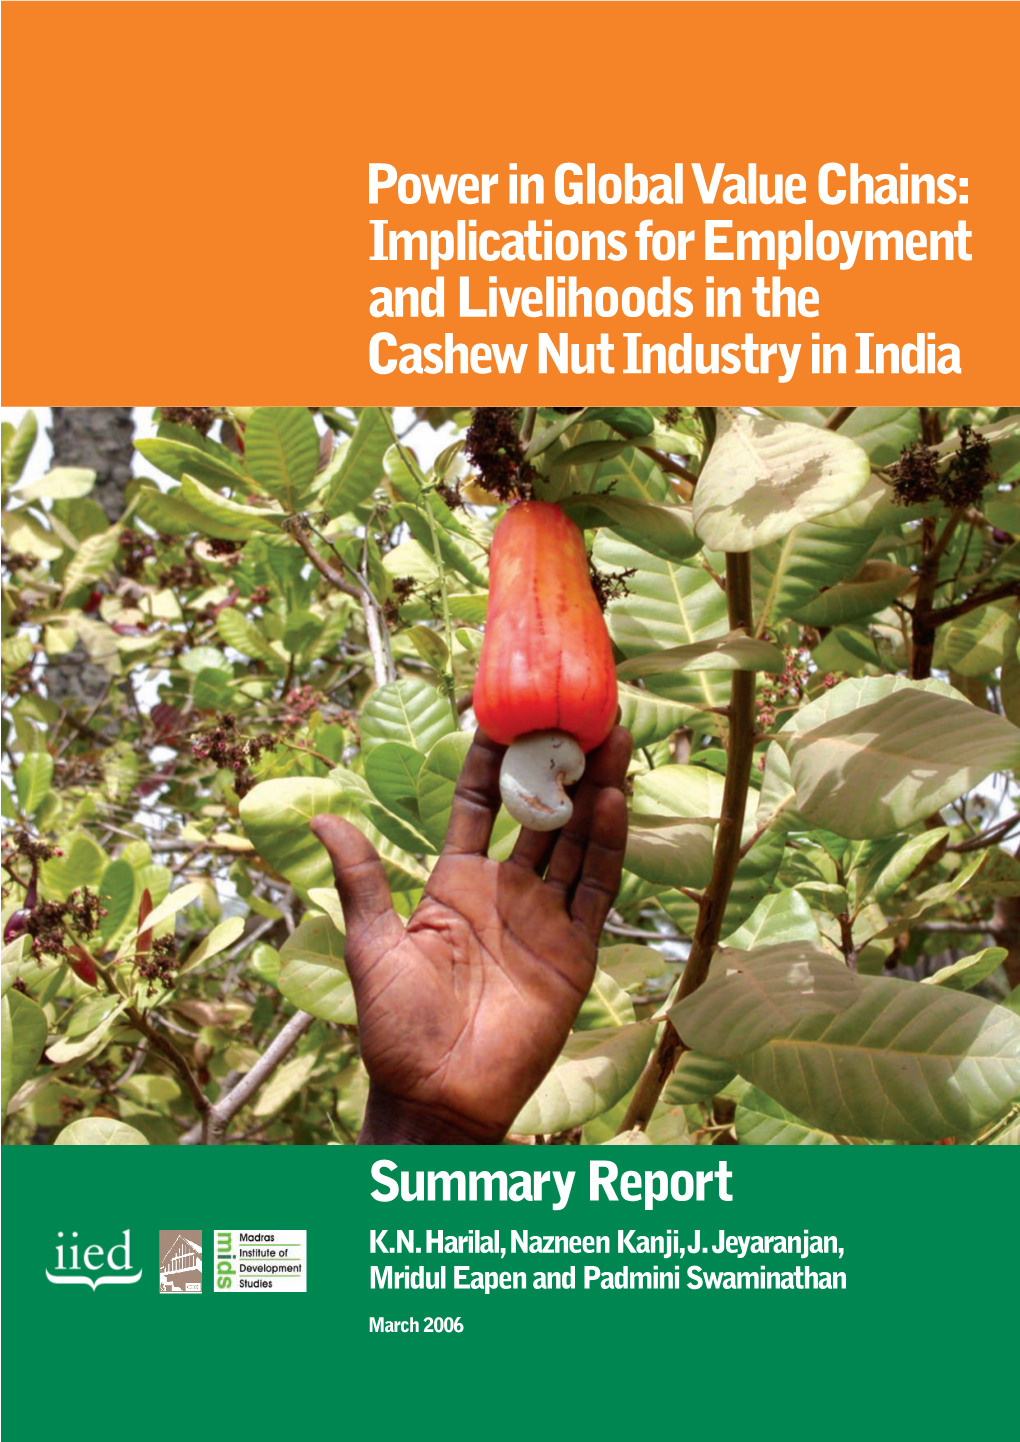 Implications for Employment and Livelihoods in the Cashew Nut Industry in India